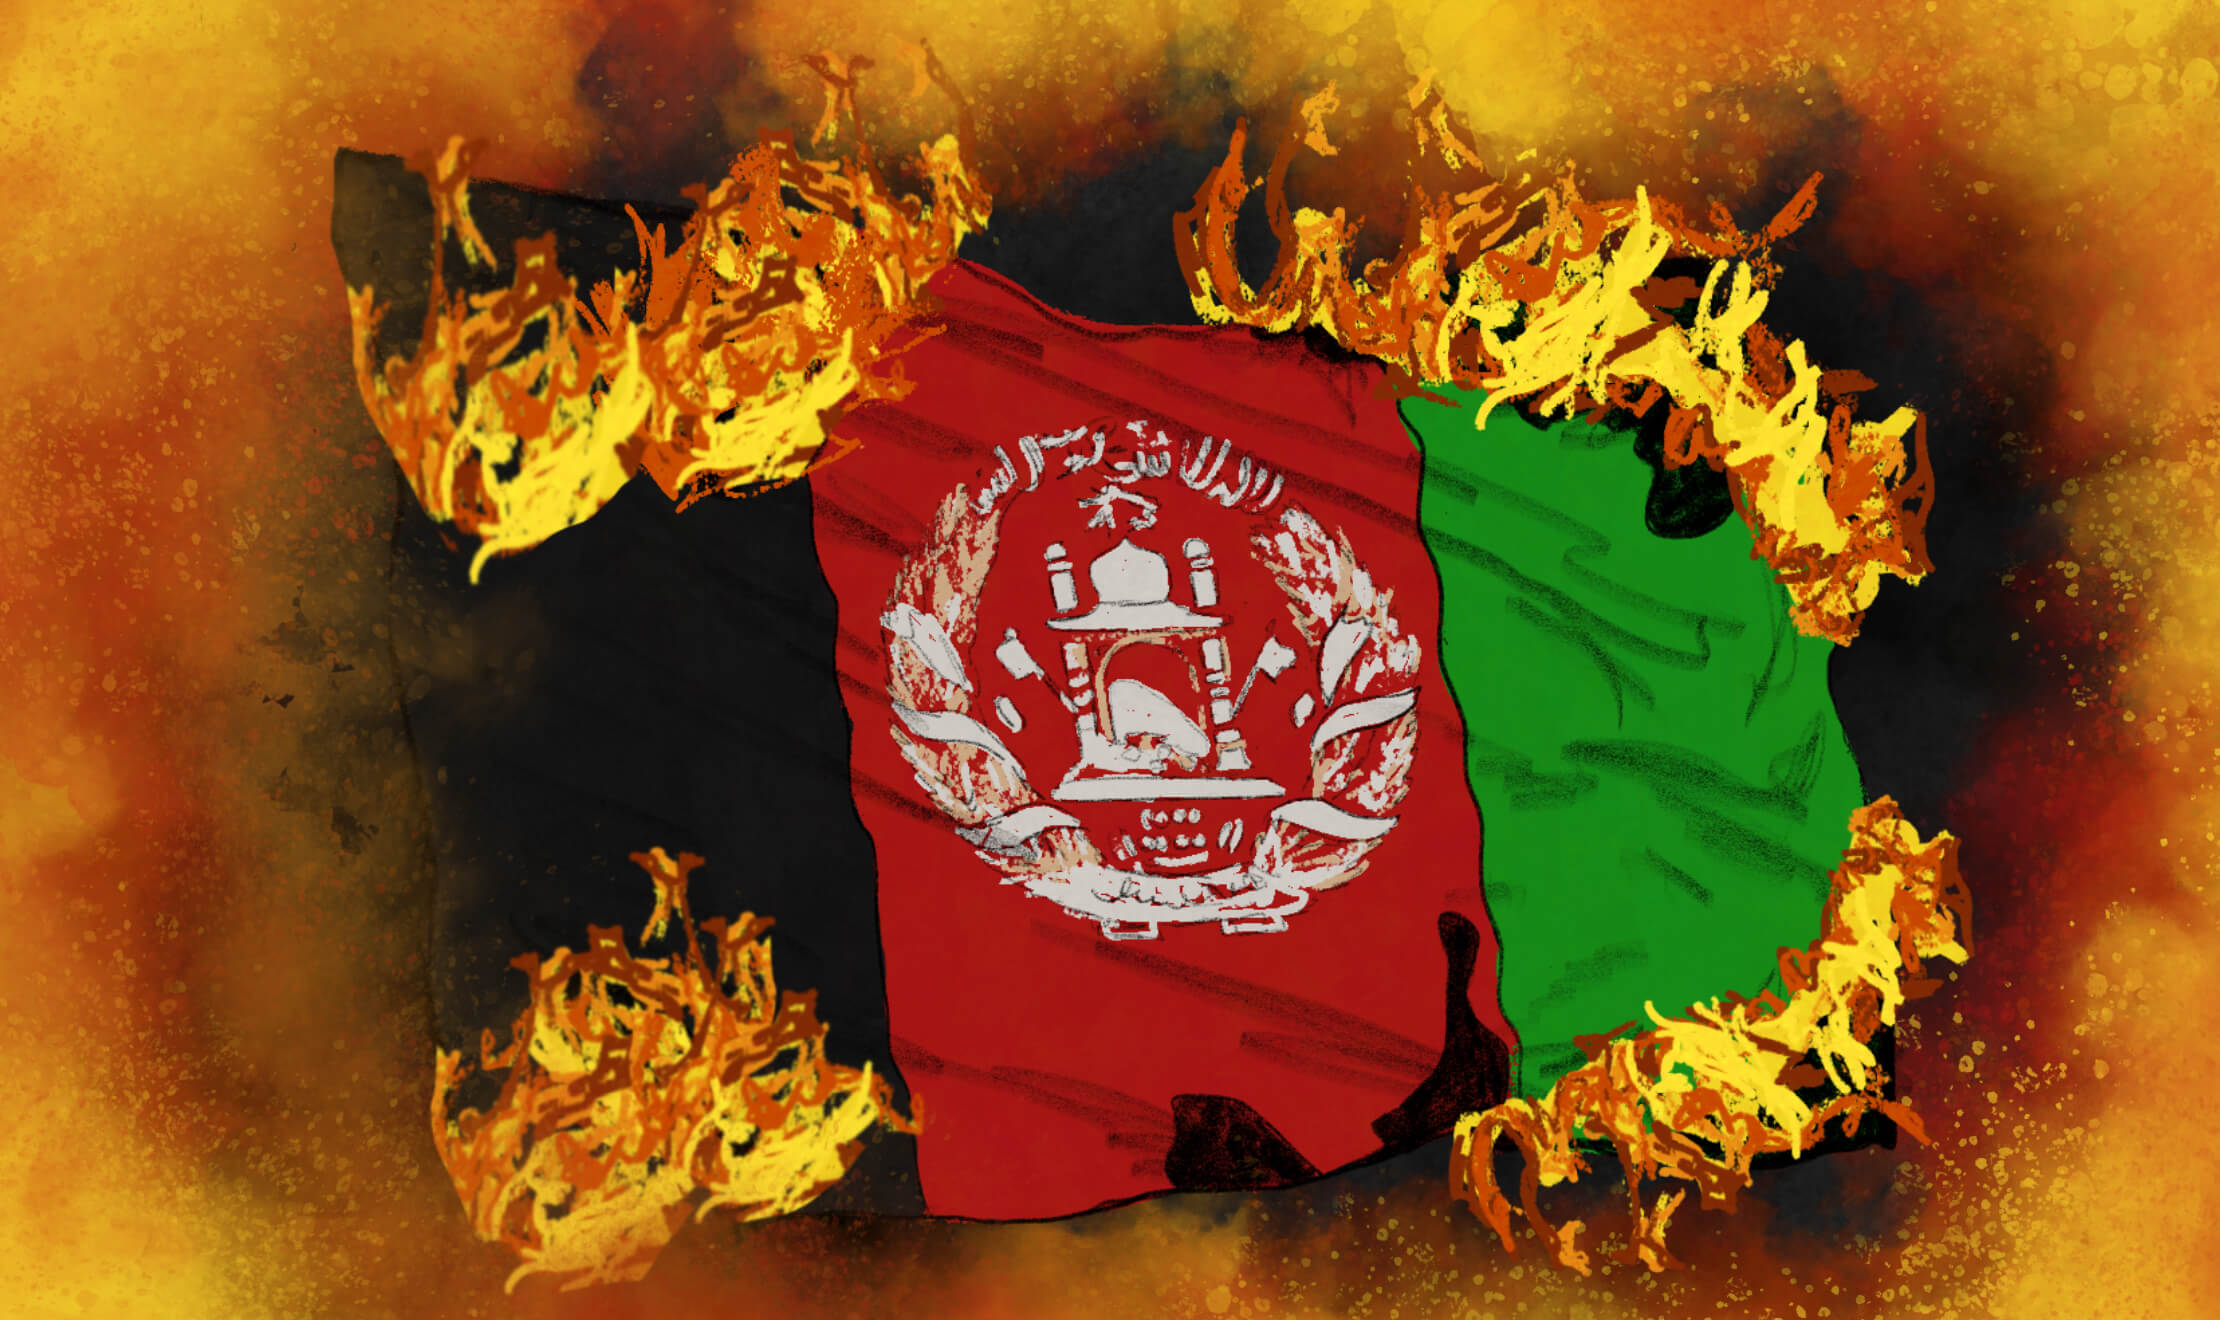 As Afghans, we burn our identities to survive, and to resist